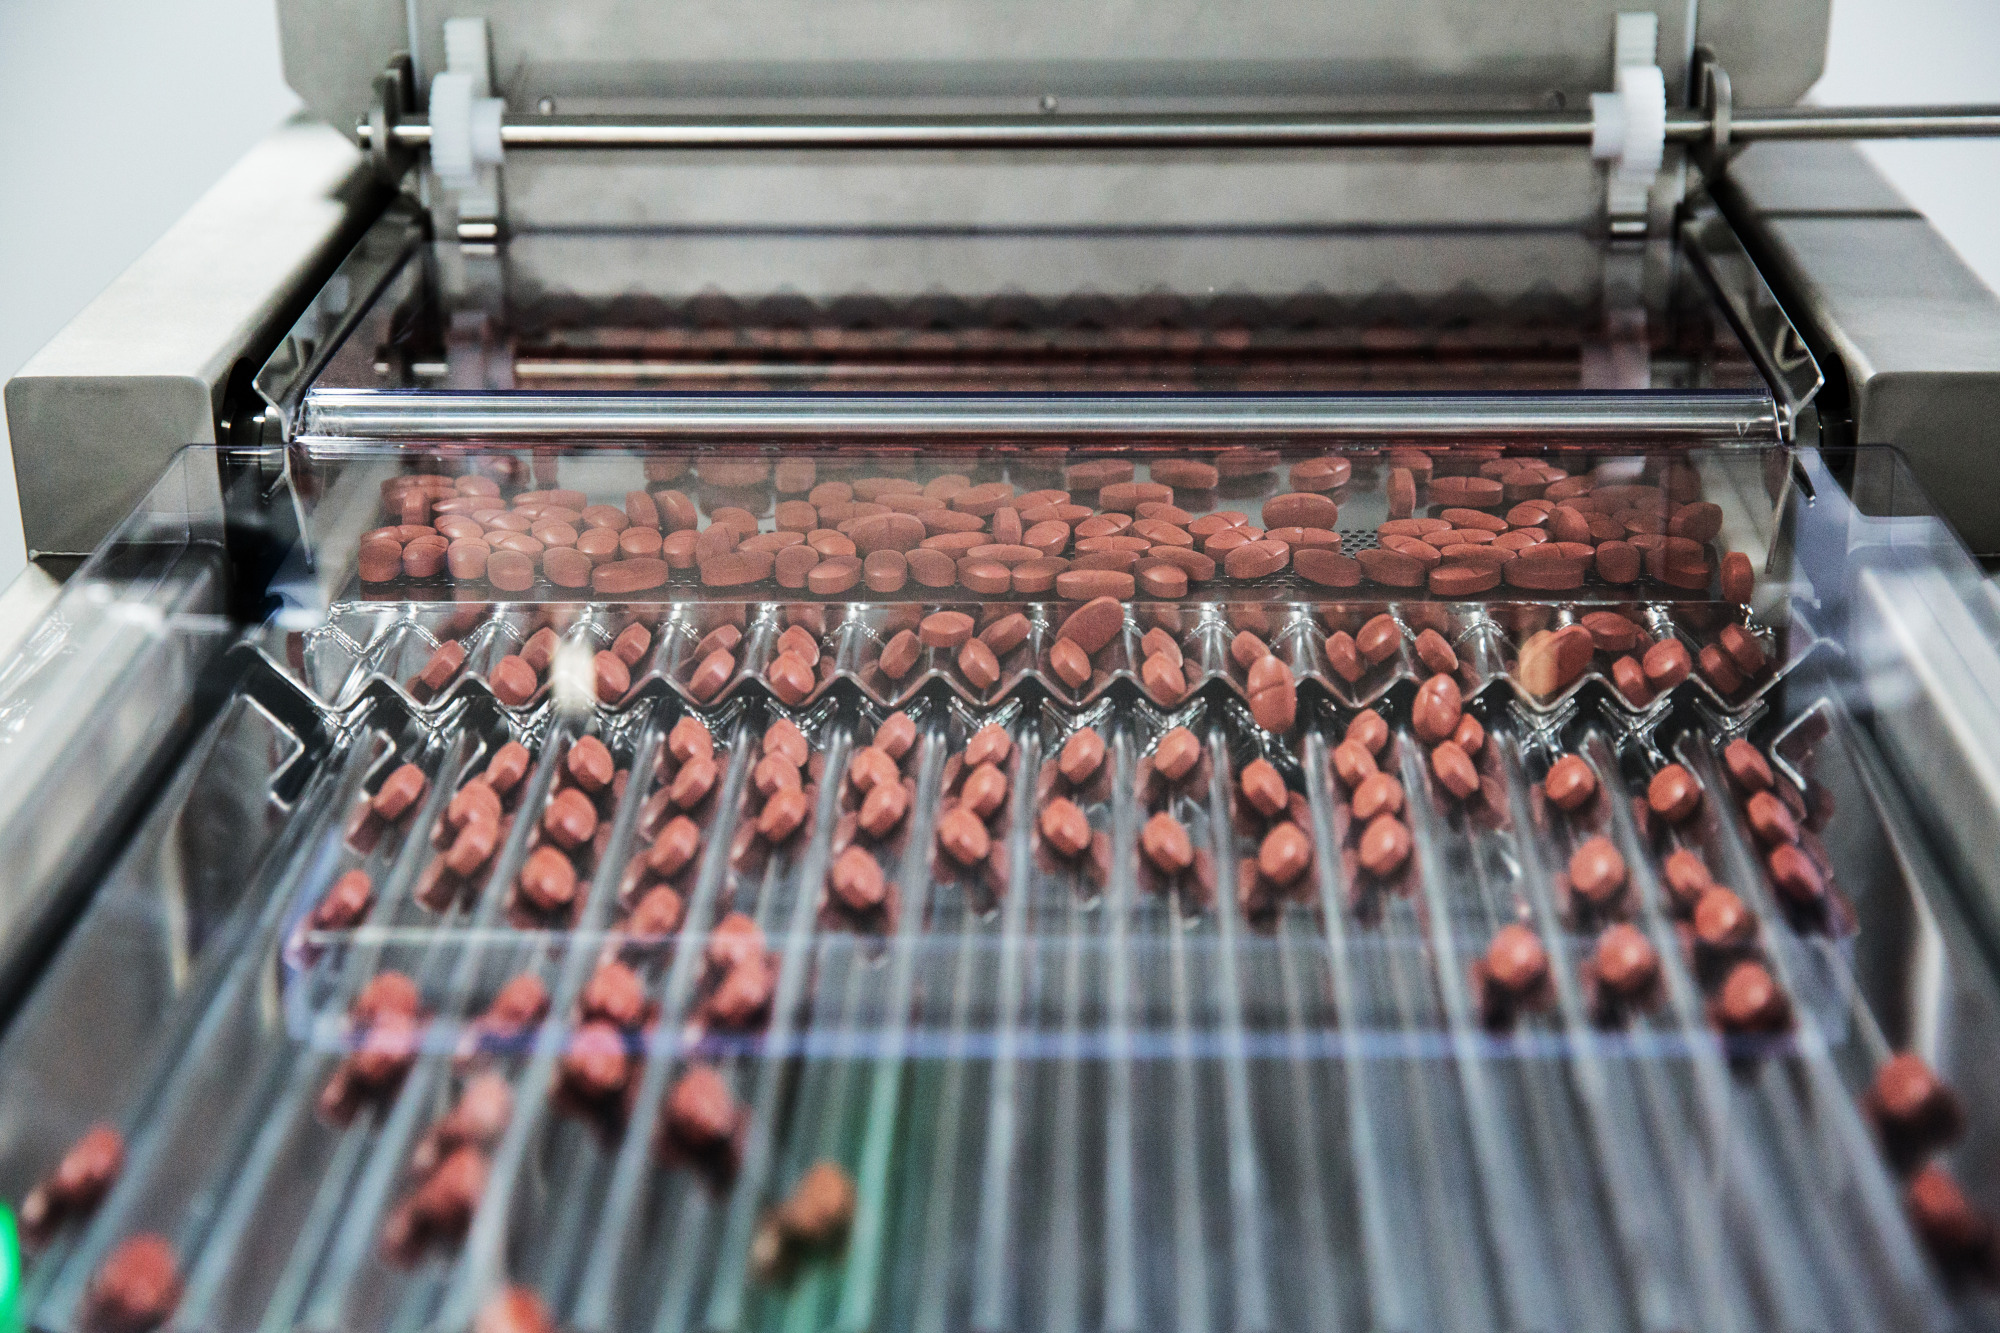 Metformin pills move through a sorting machine at a pharmaceutical plant in India.